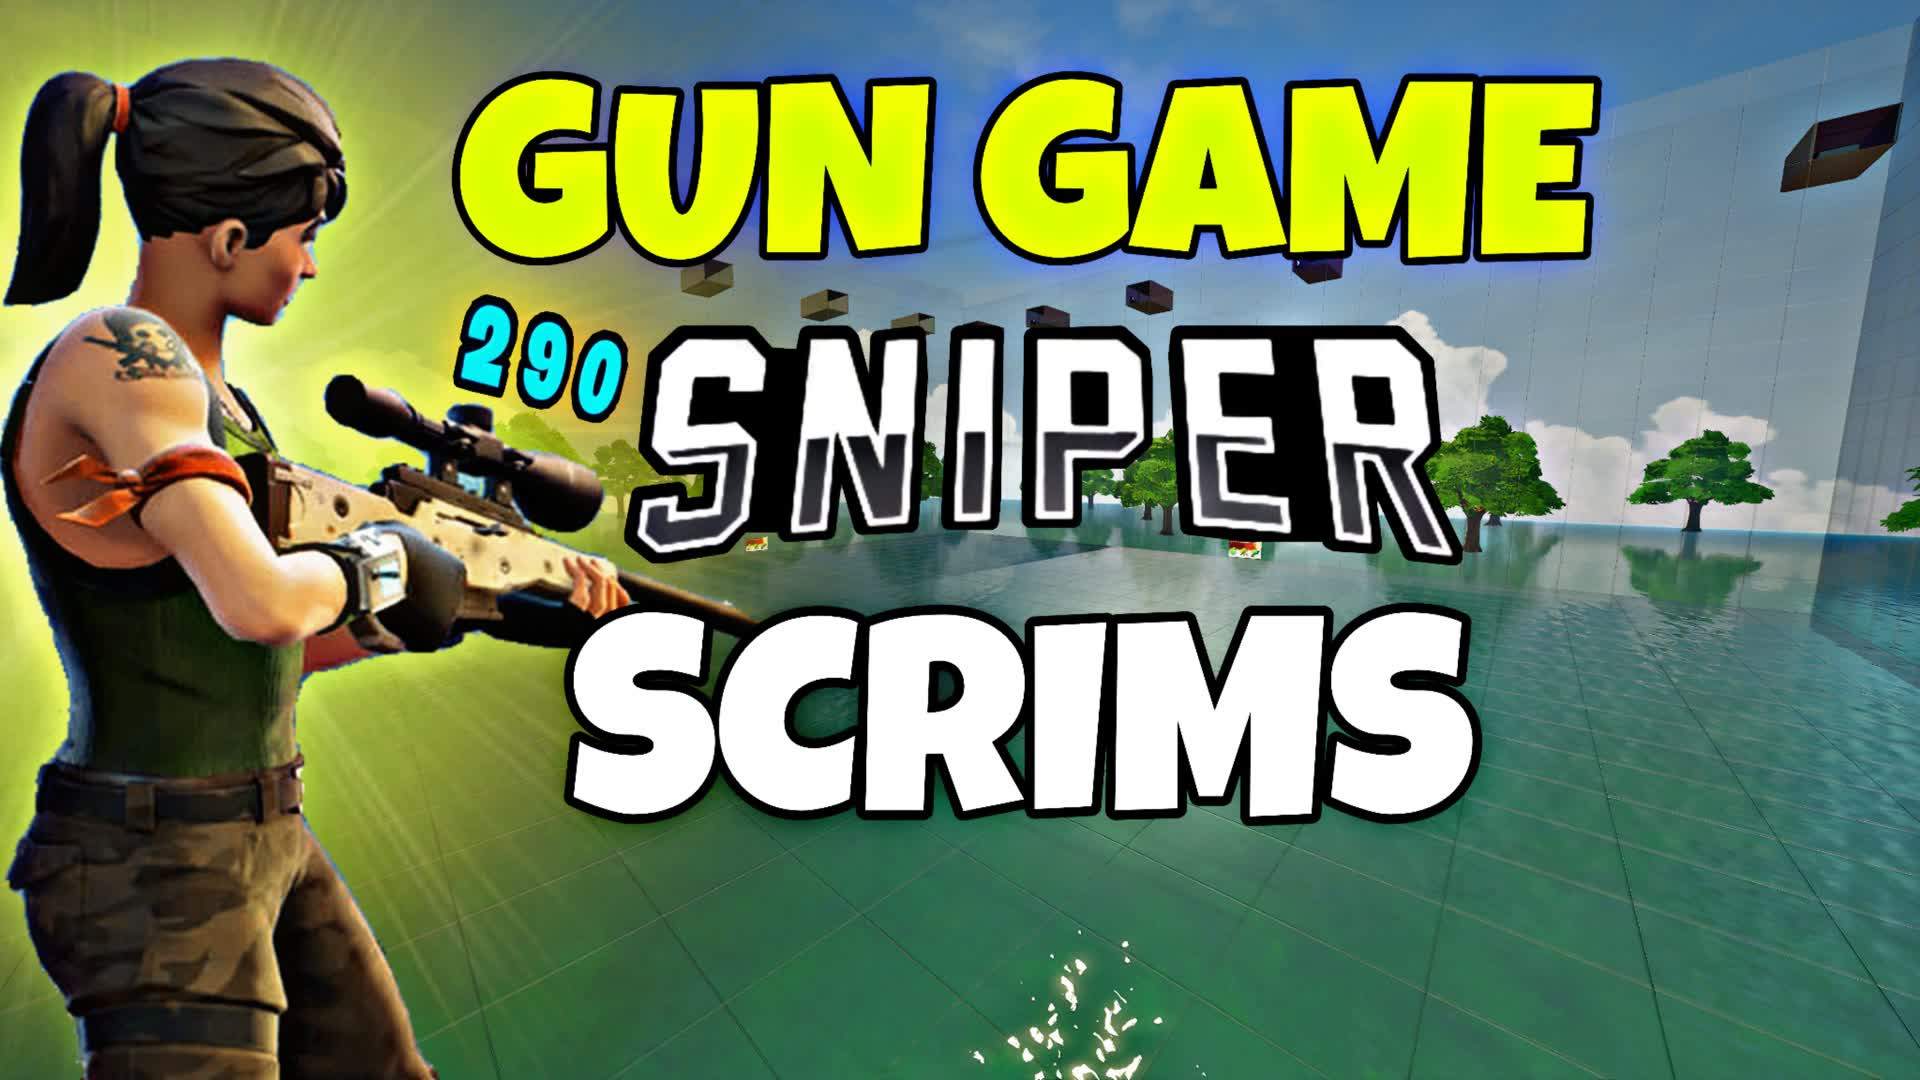 🔥SCRIMS ONE SHOT SNIPERS ONLY - سكرمز🔥